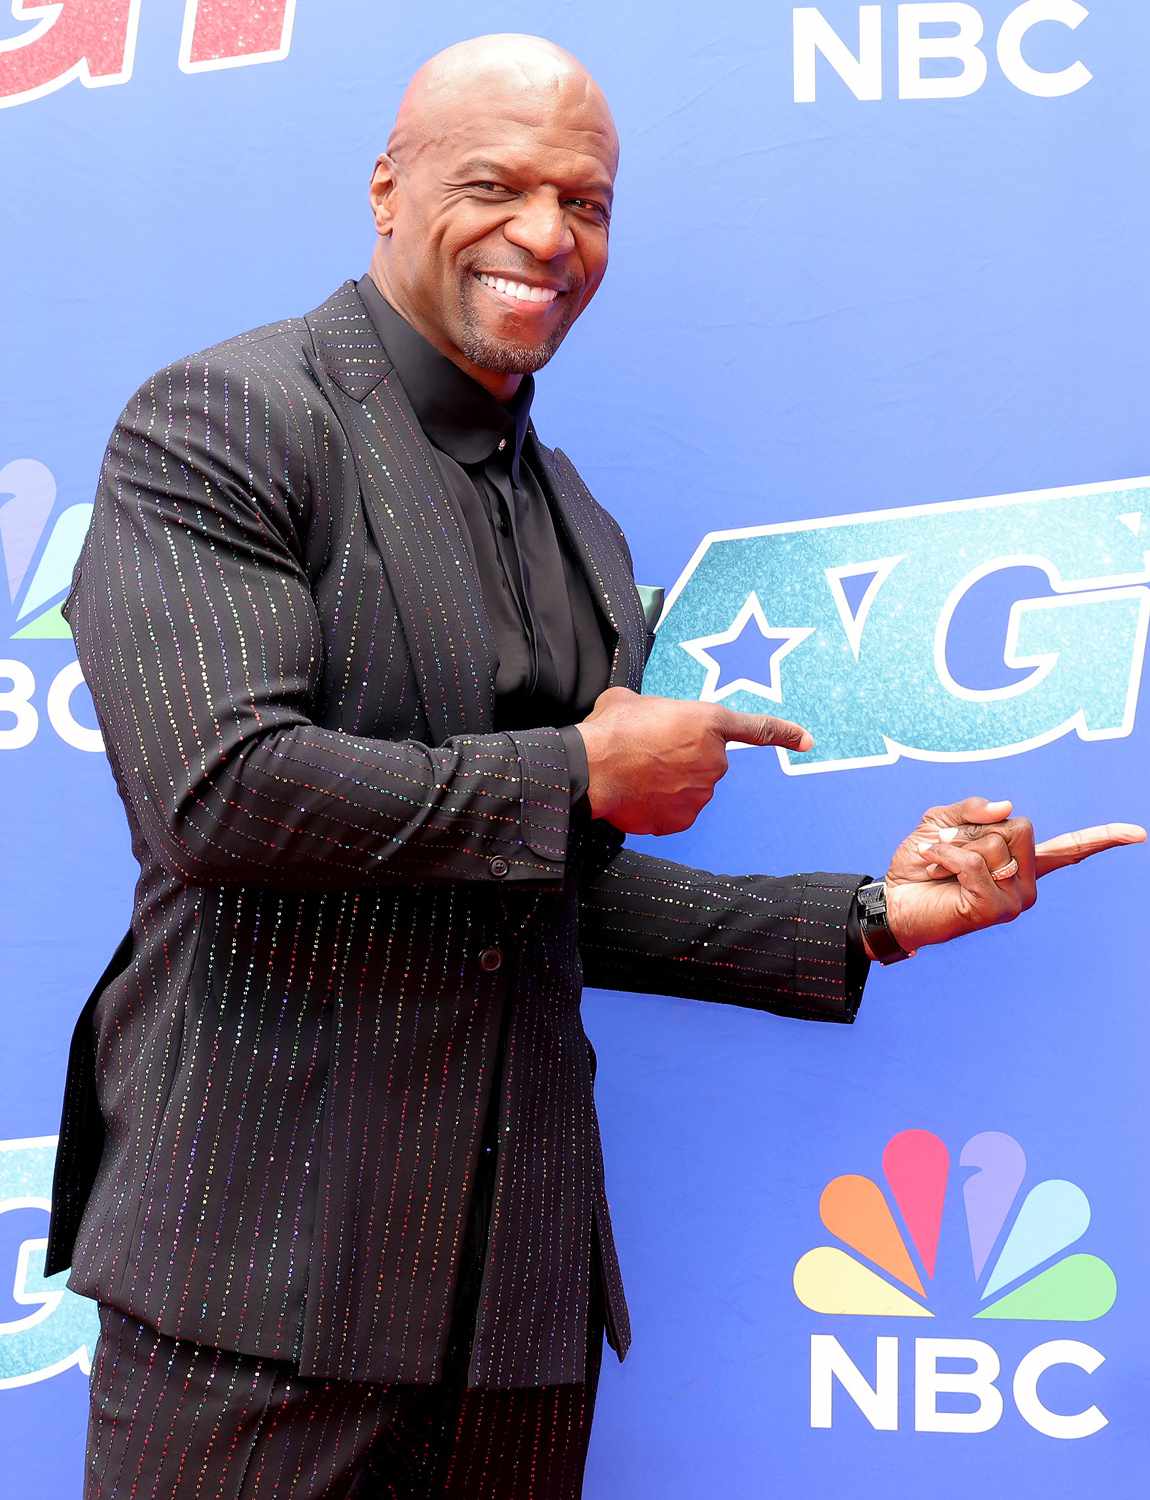 Terry Crews attends the "America's Got Talent" Season 19 Red Carpet at Pasadena Civic Auditorium on March 